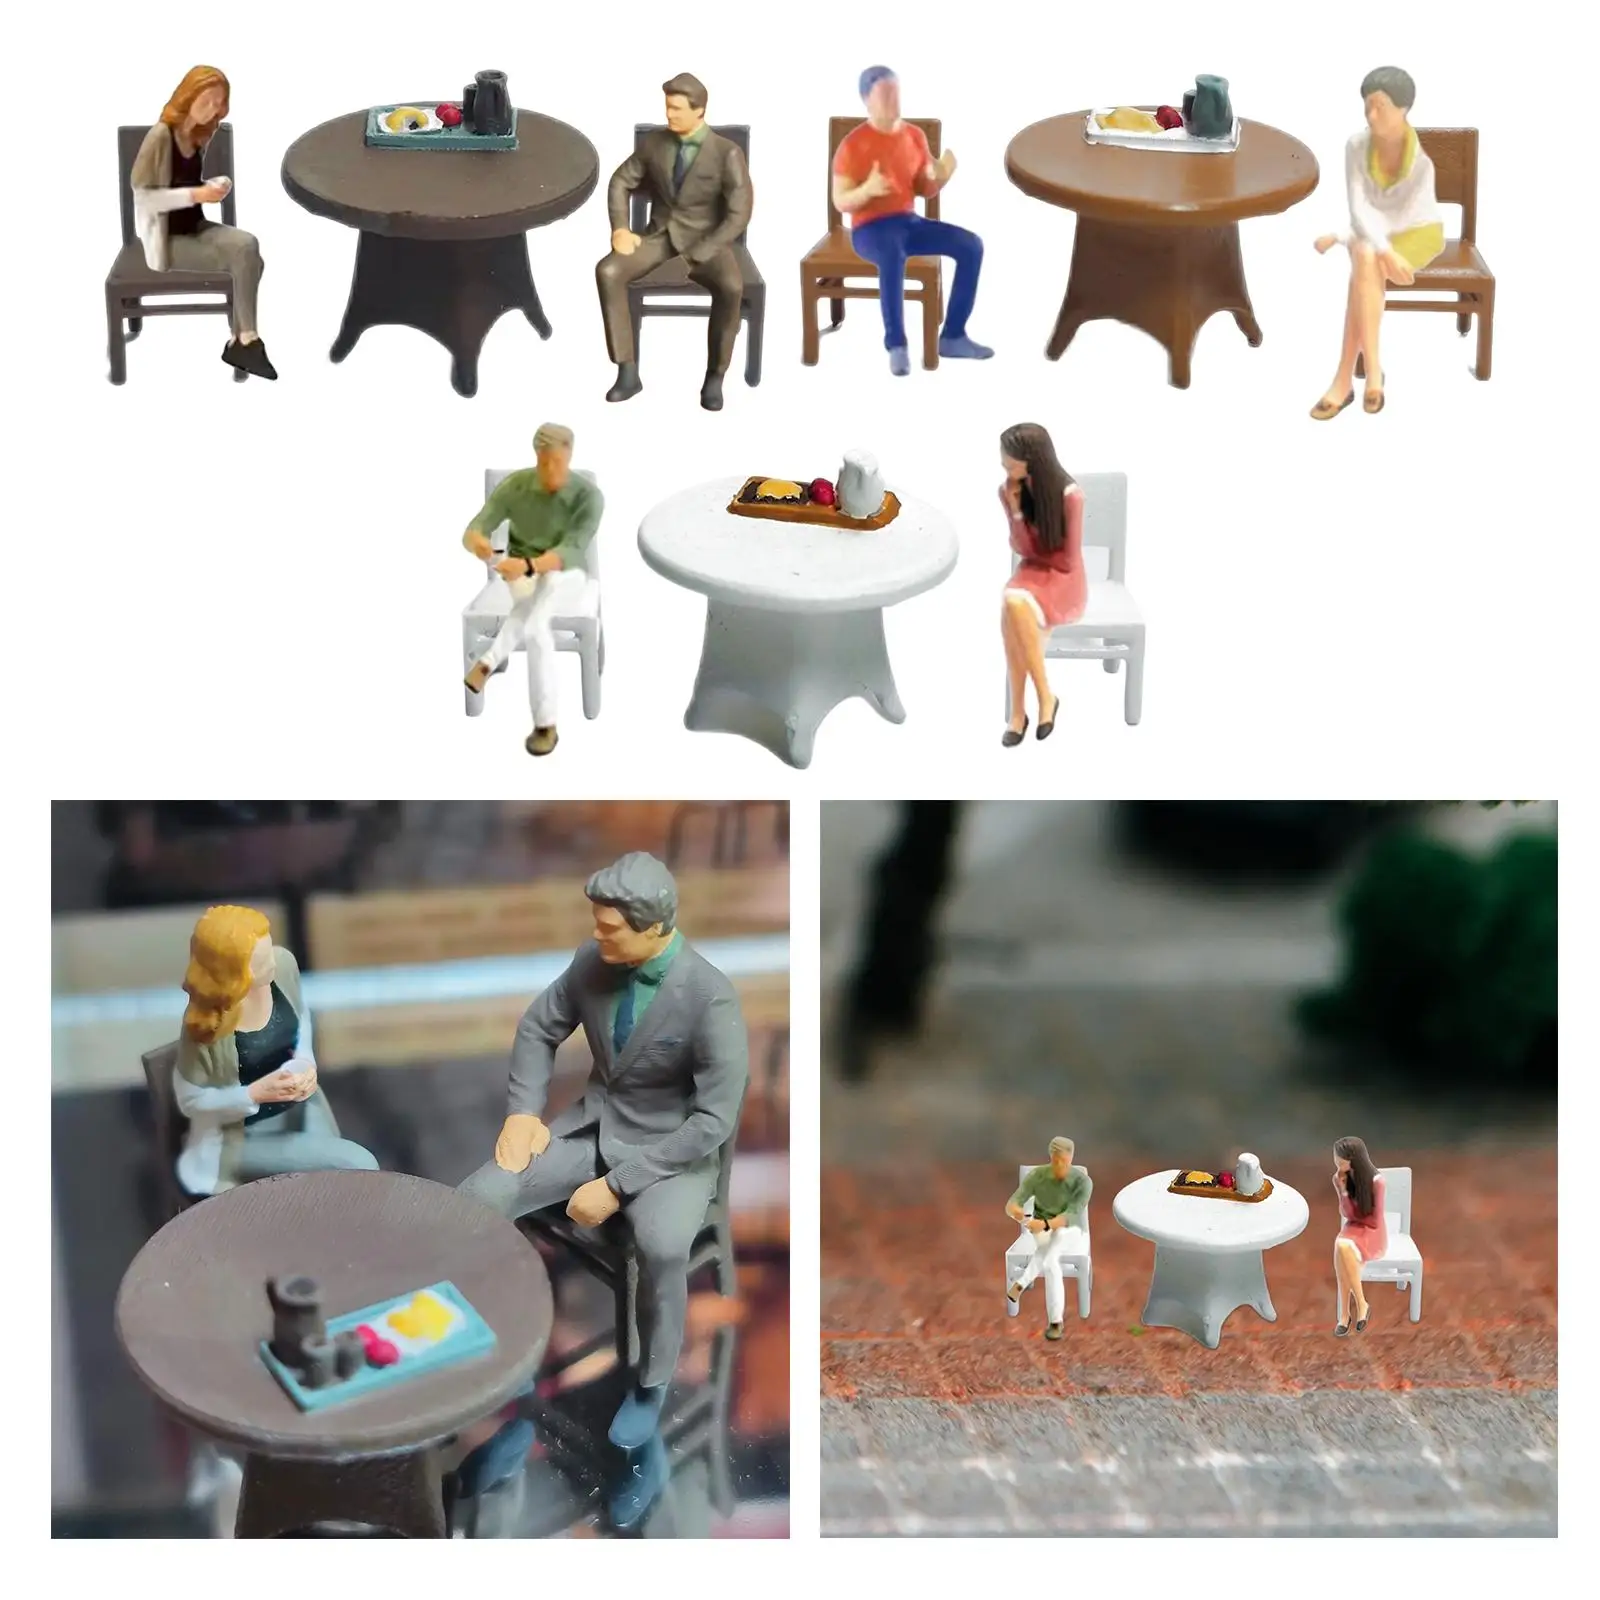 1/64 Action Figures Collection Sand Table Ornament Model Trains People Figures for Miniature Scene Diorama Dollhouse Decoration